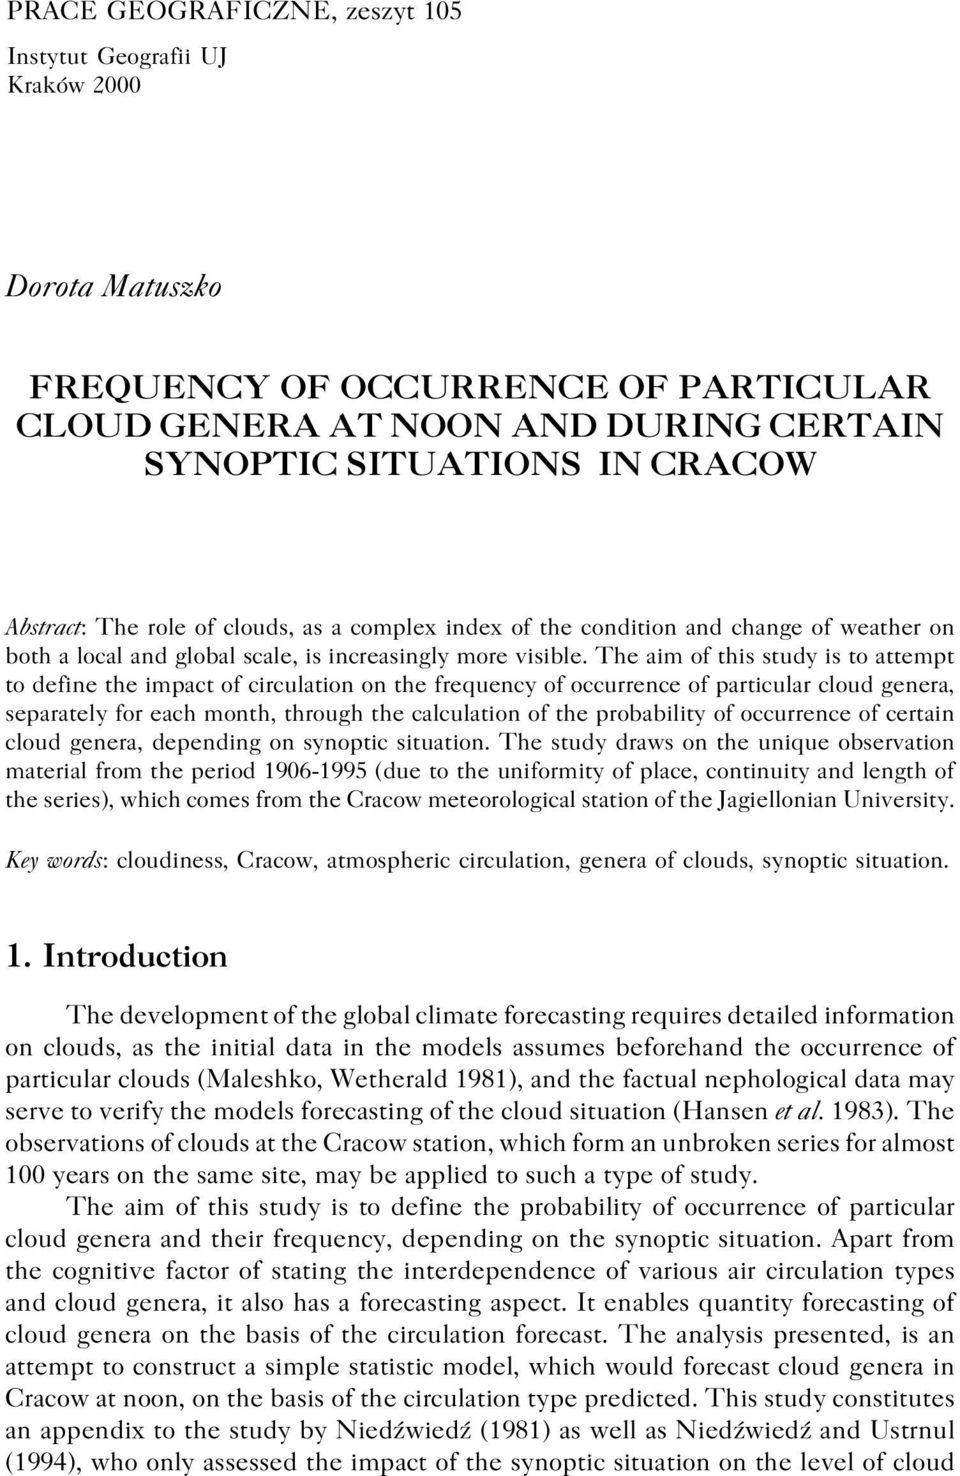 The aim of this study is to attempt to define the impact of circulation on the frequency of occurrence of particular cloud genera, separately for each month, through the calculation of the